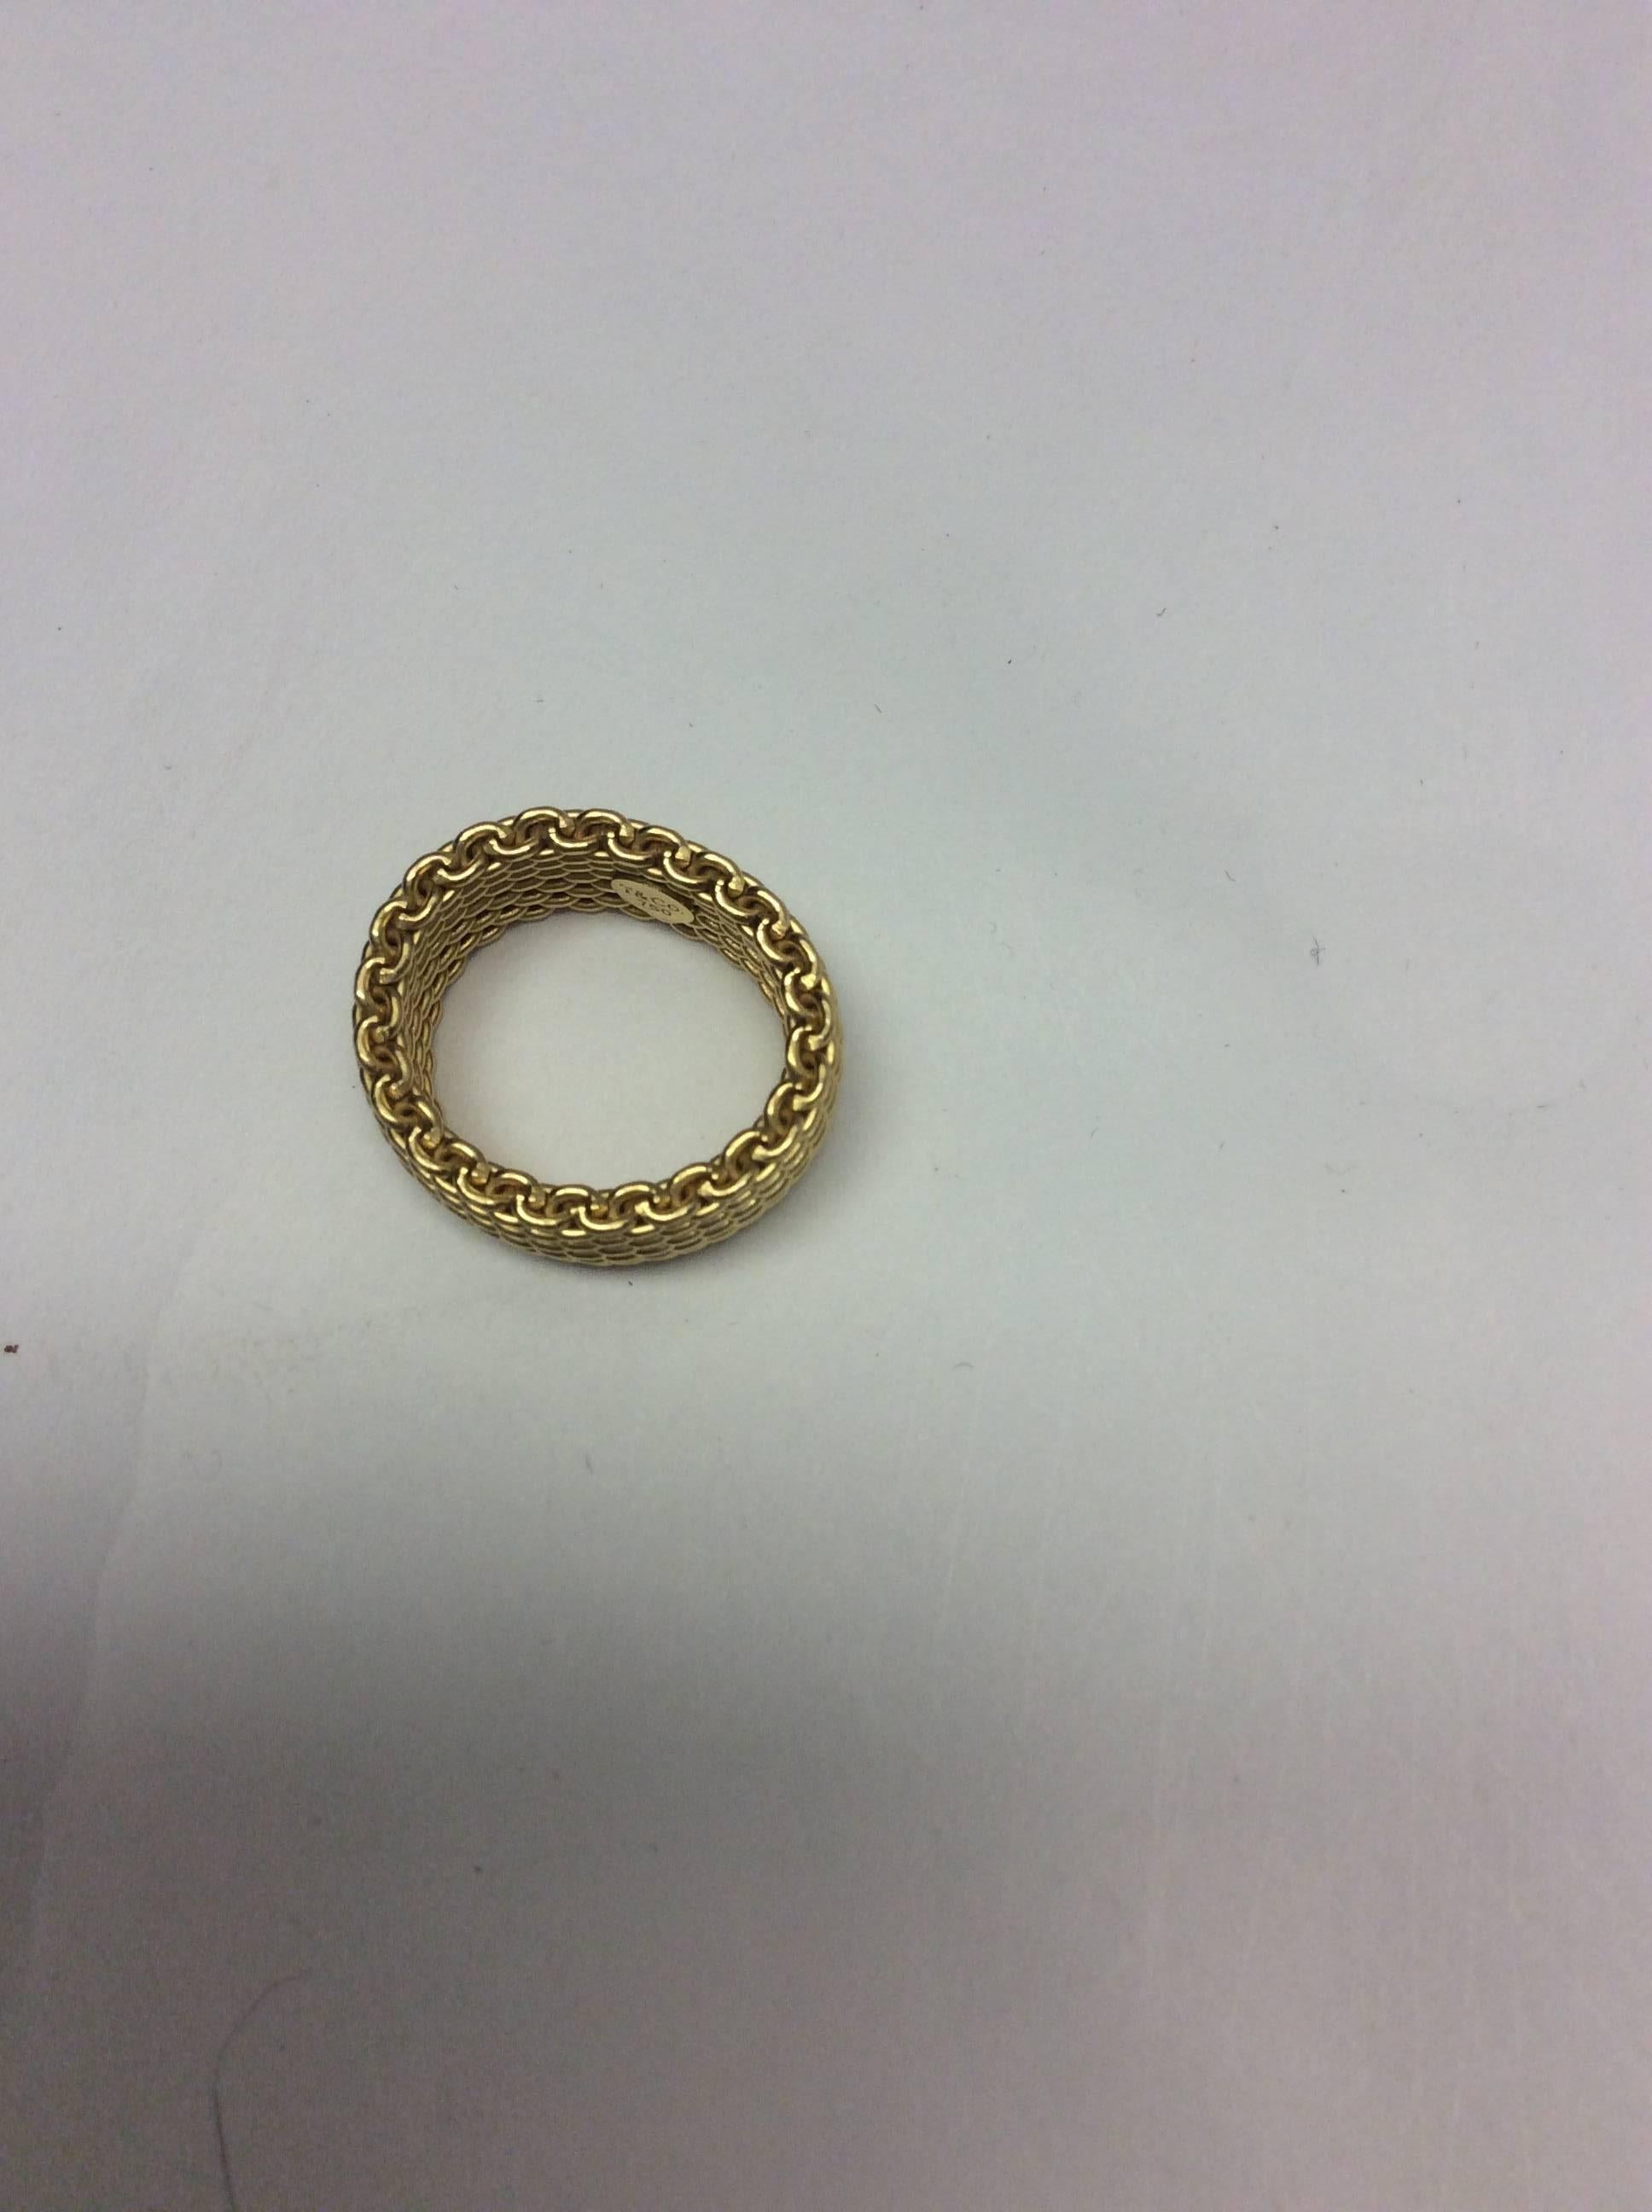 Tiffany & Co. Gold Mesh Somerset 18K Ring  In Excellent Condition For Sale In Narberth, PA